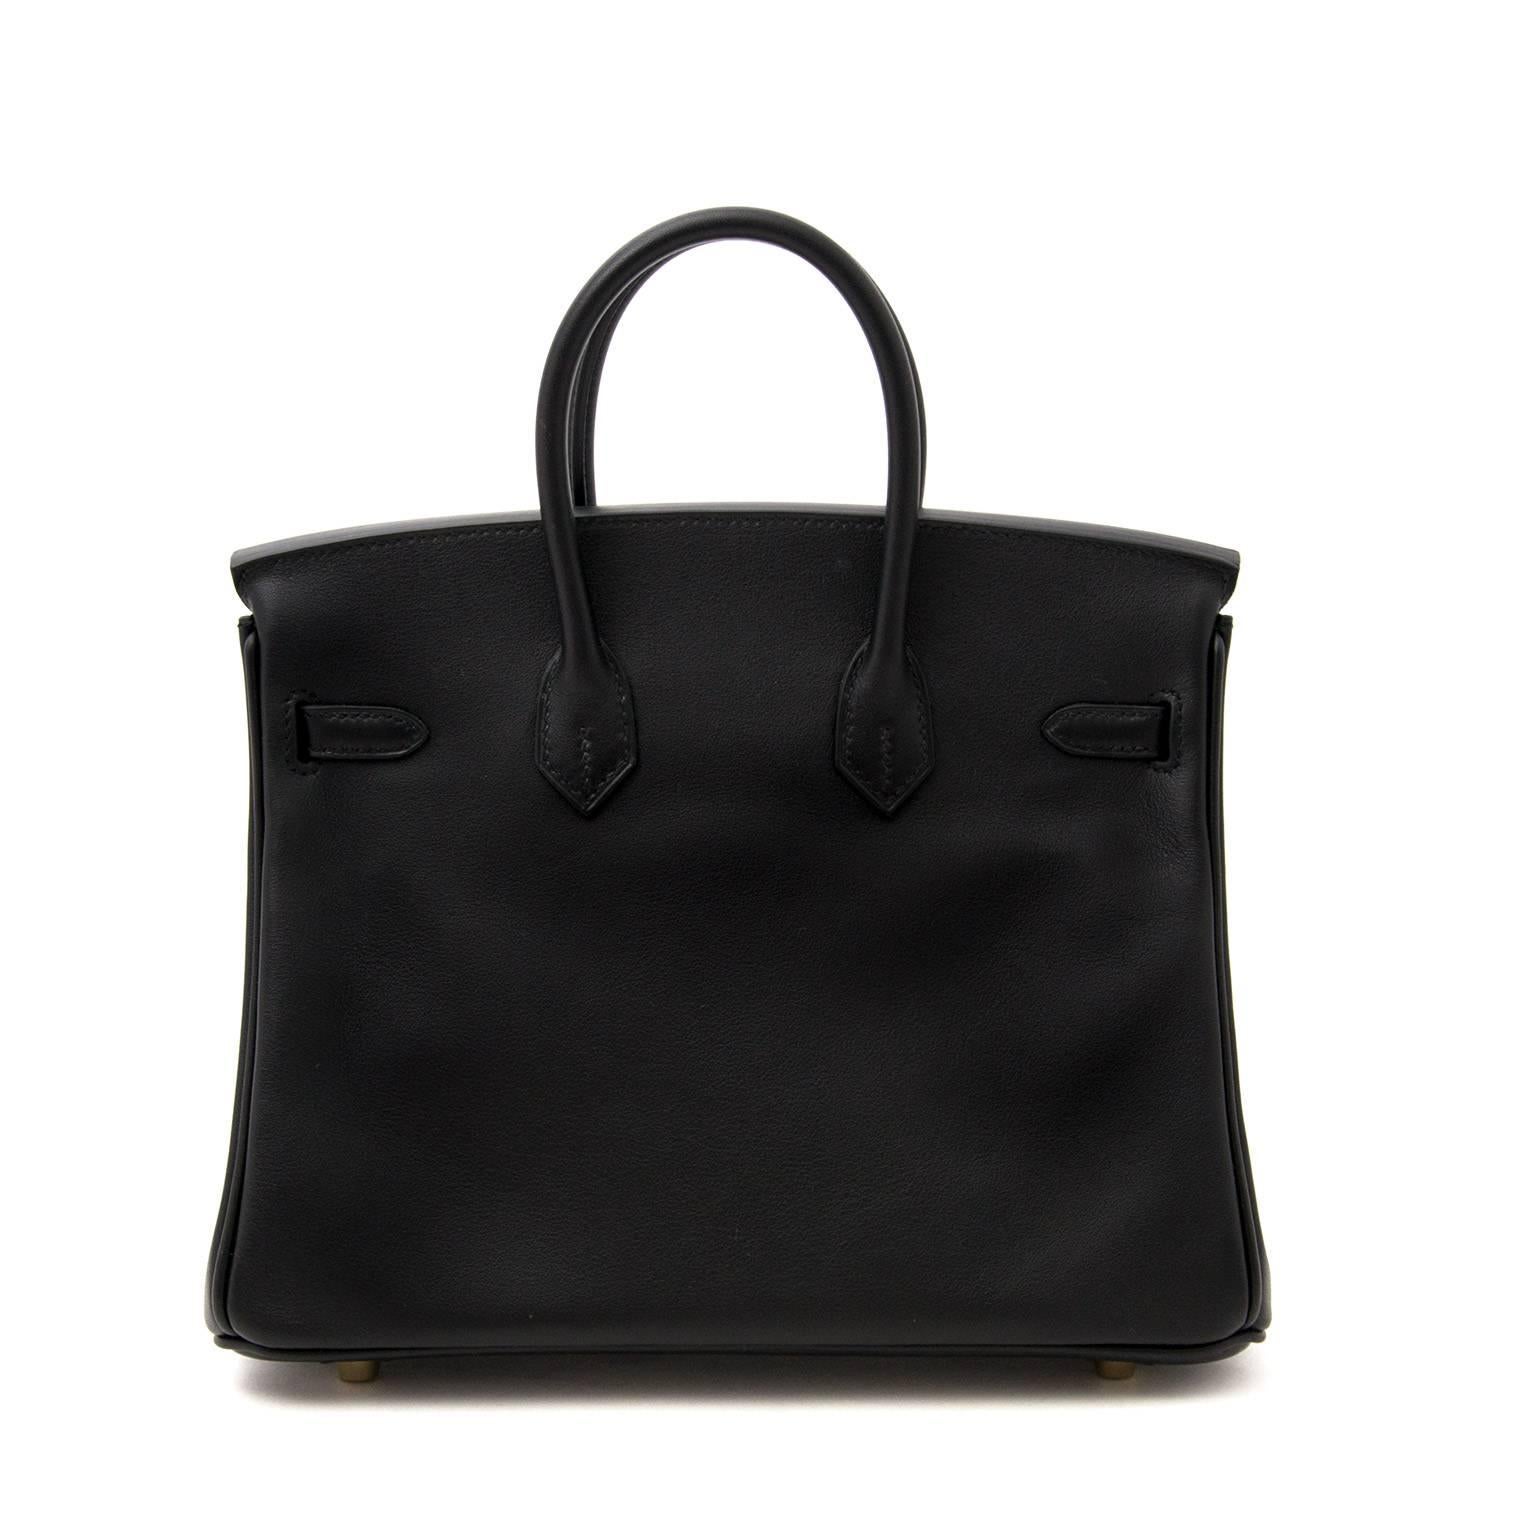 Brand New Hermès Birkin 25cm Black Swift GHW.

Brand new/storefresh birkin bag made out of swift leather .
Hermès swift leather is known  for it's fine grain that is amazingly soft to touch, but is also a luminous type of leather.

Its